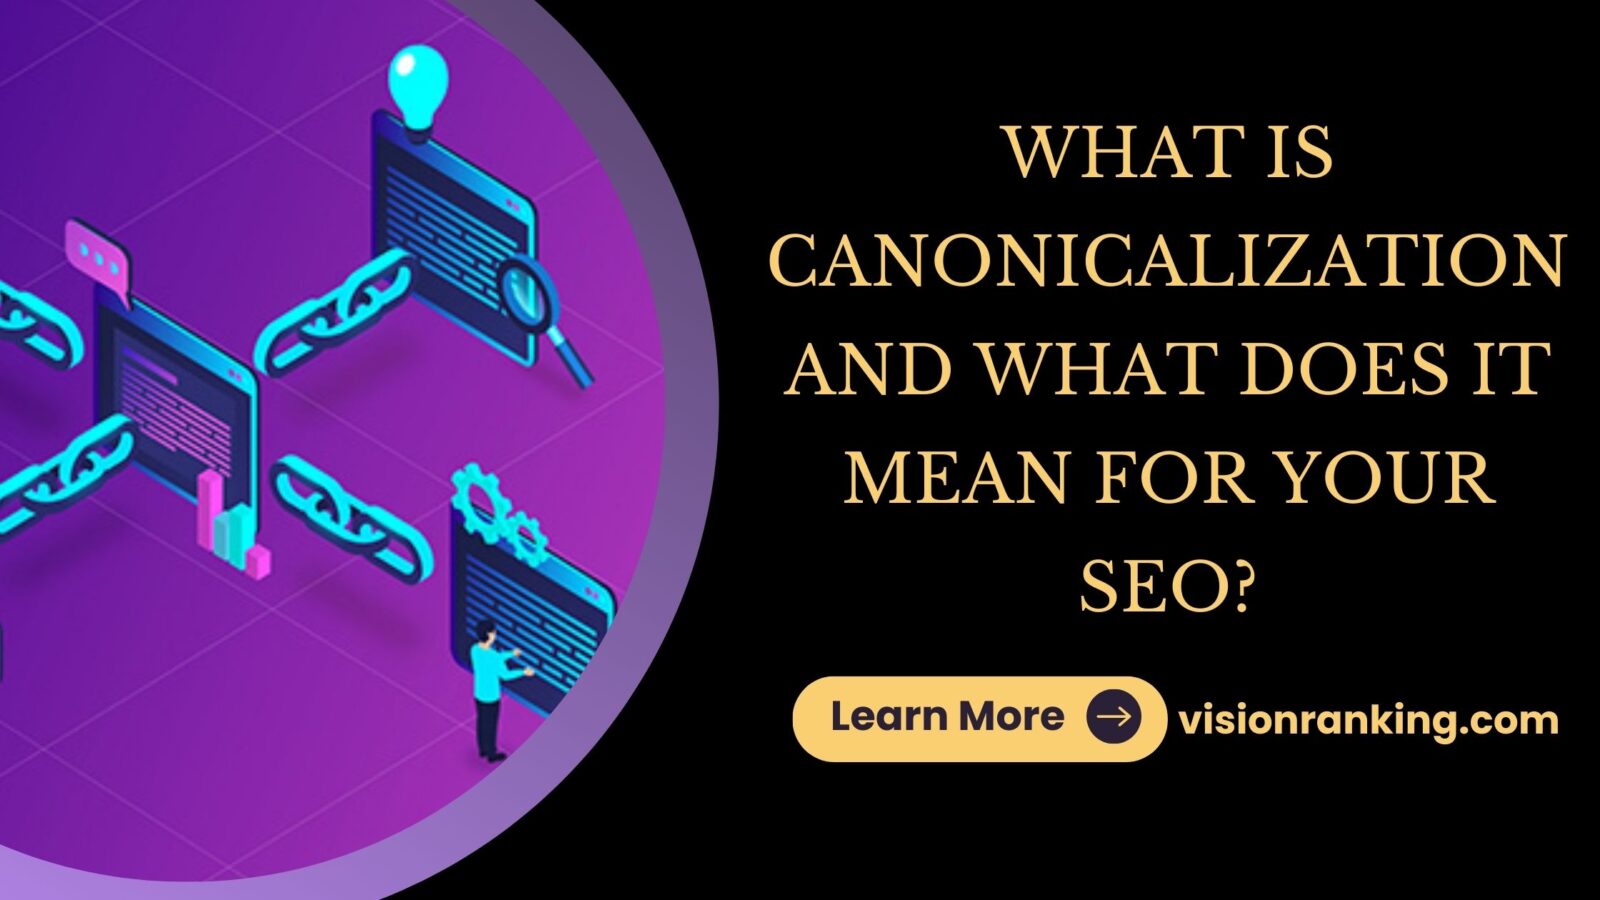 Vision Ranking - What Is Canonicalization And What Does It Mean For Your SEO?